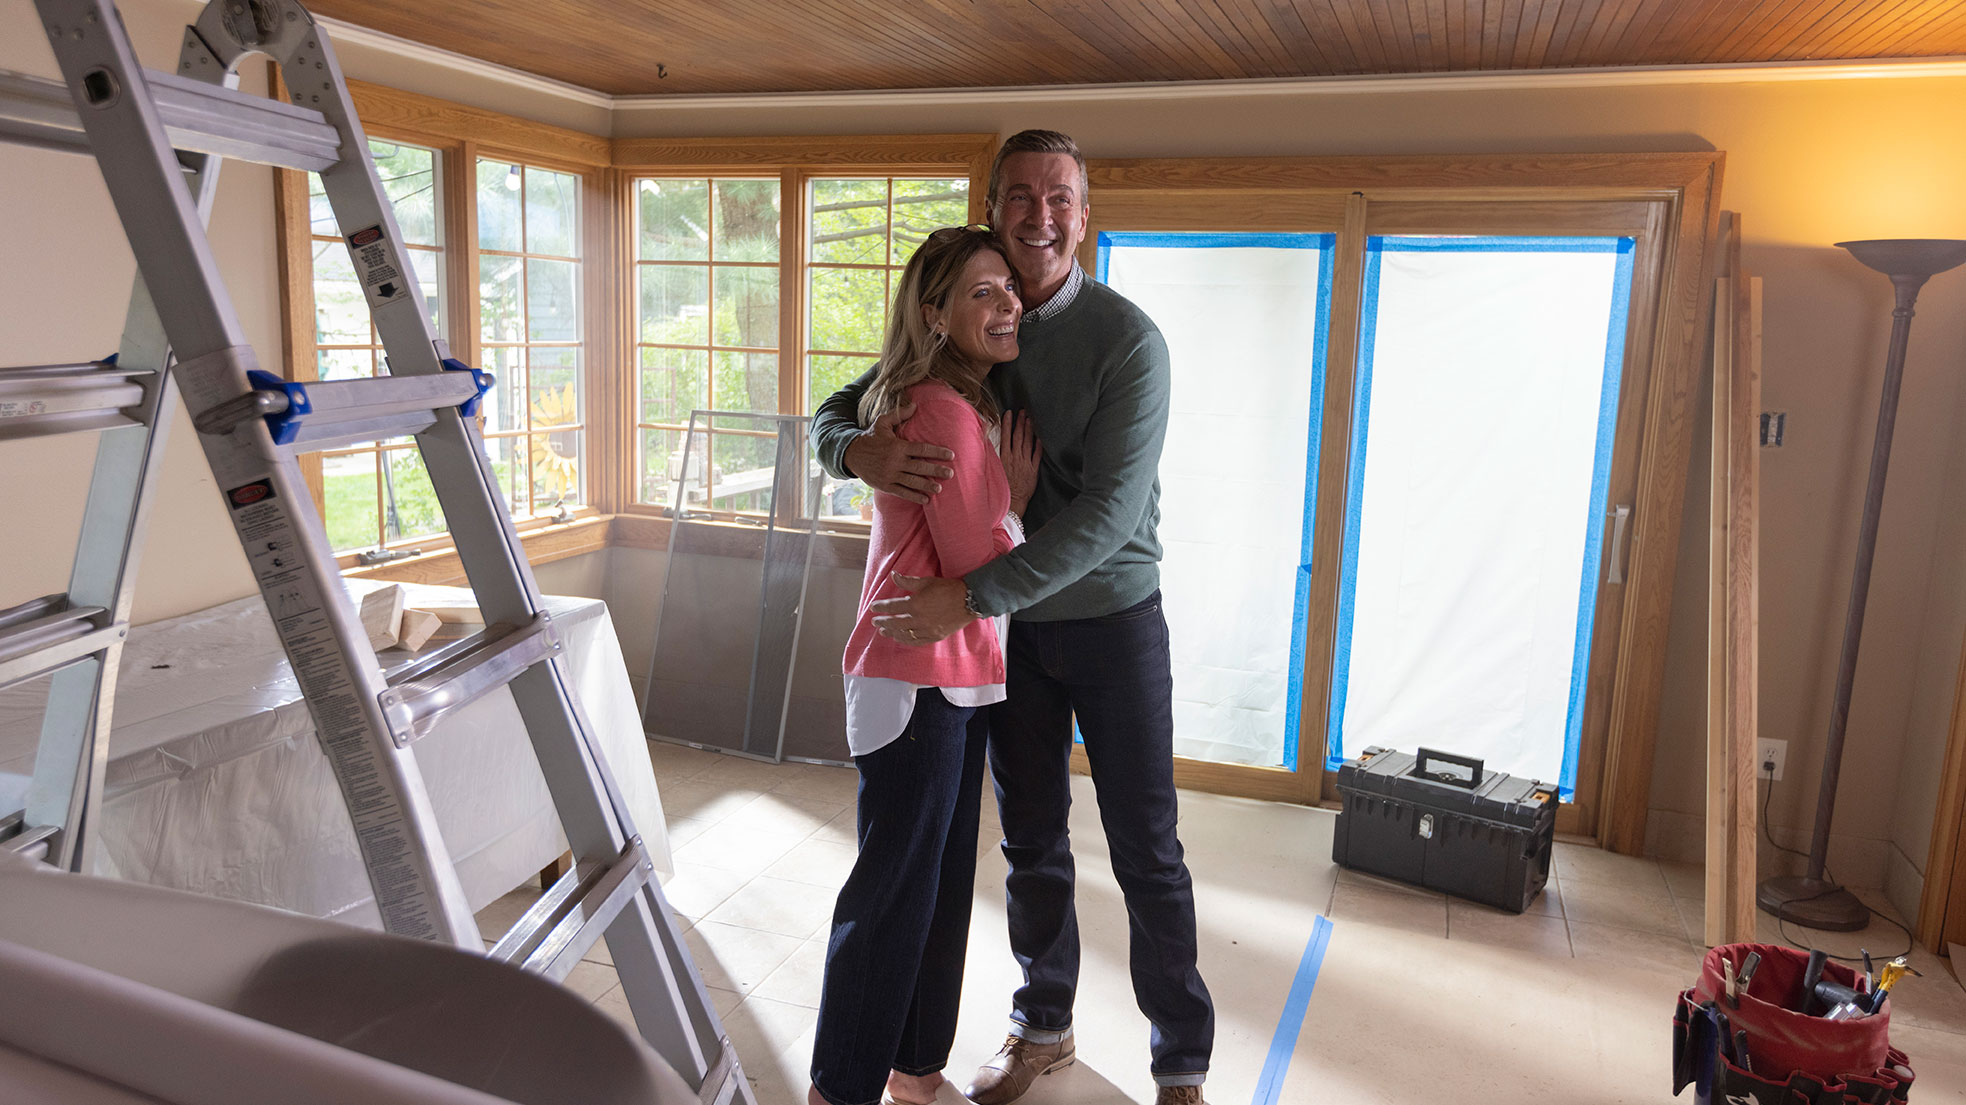 Your 2022 home goals: Tips for financing home improvements or a new home    